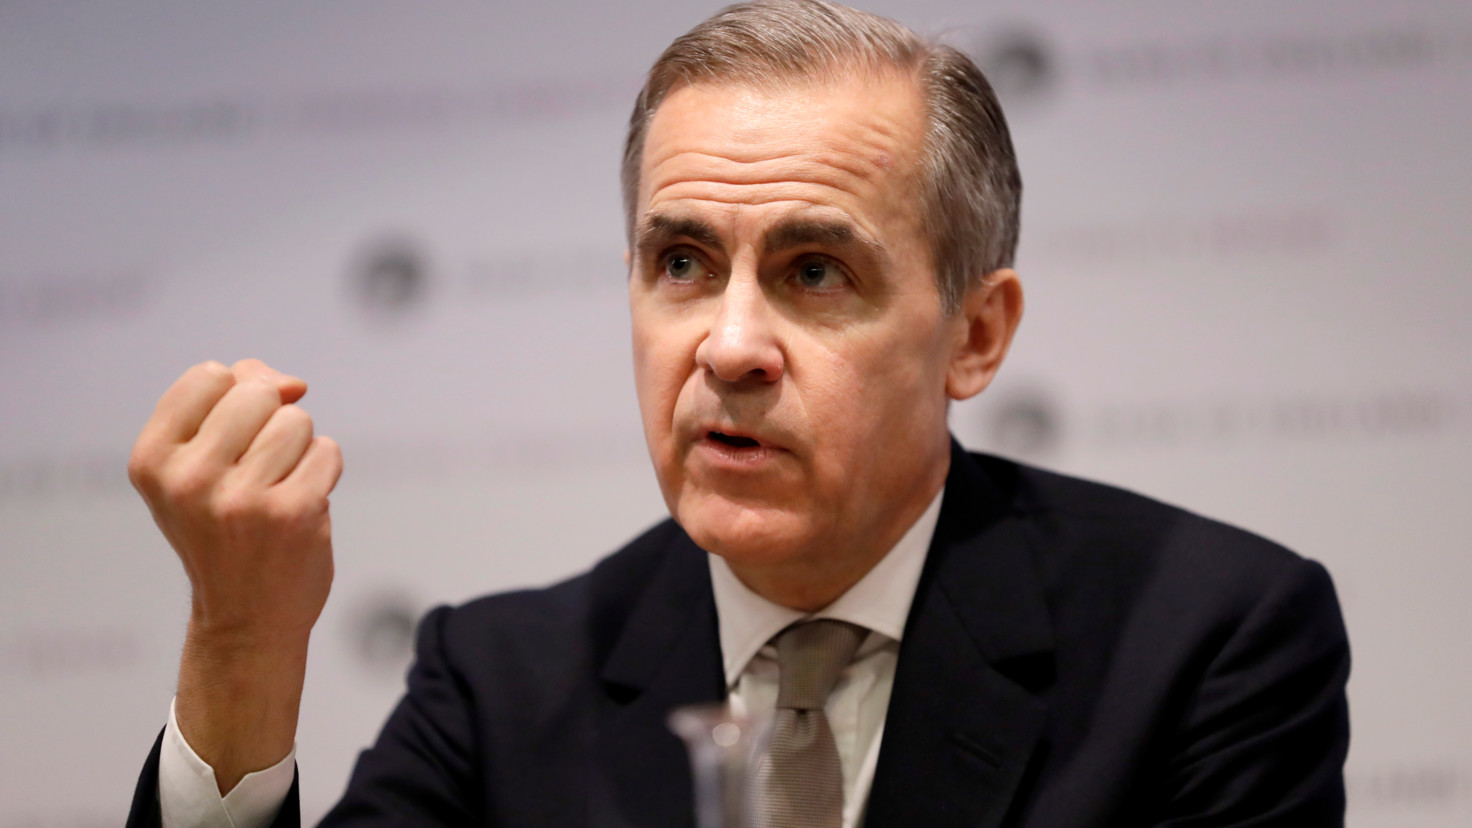 Bank of England Carney hints at interest-rate cut 